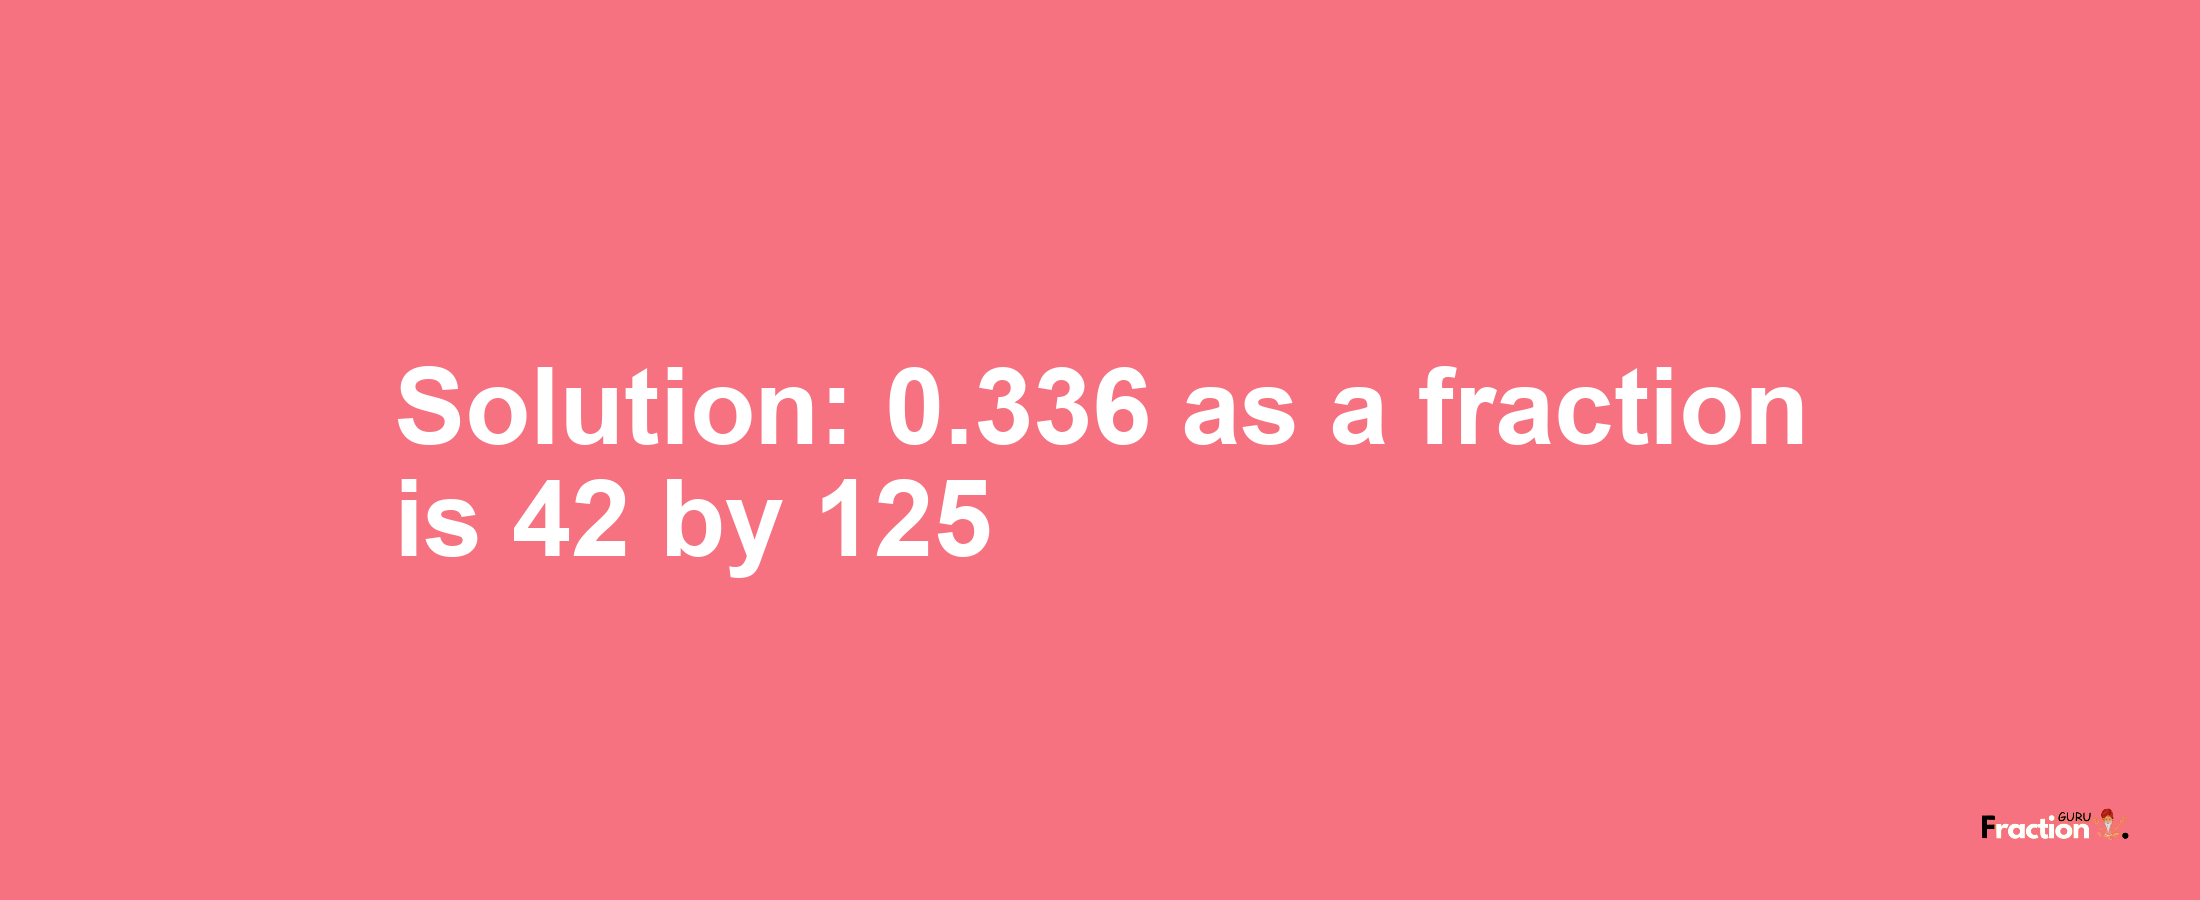 Solution:0.336 as a fraction is 42/125